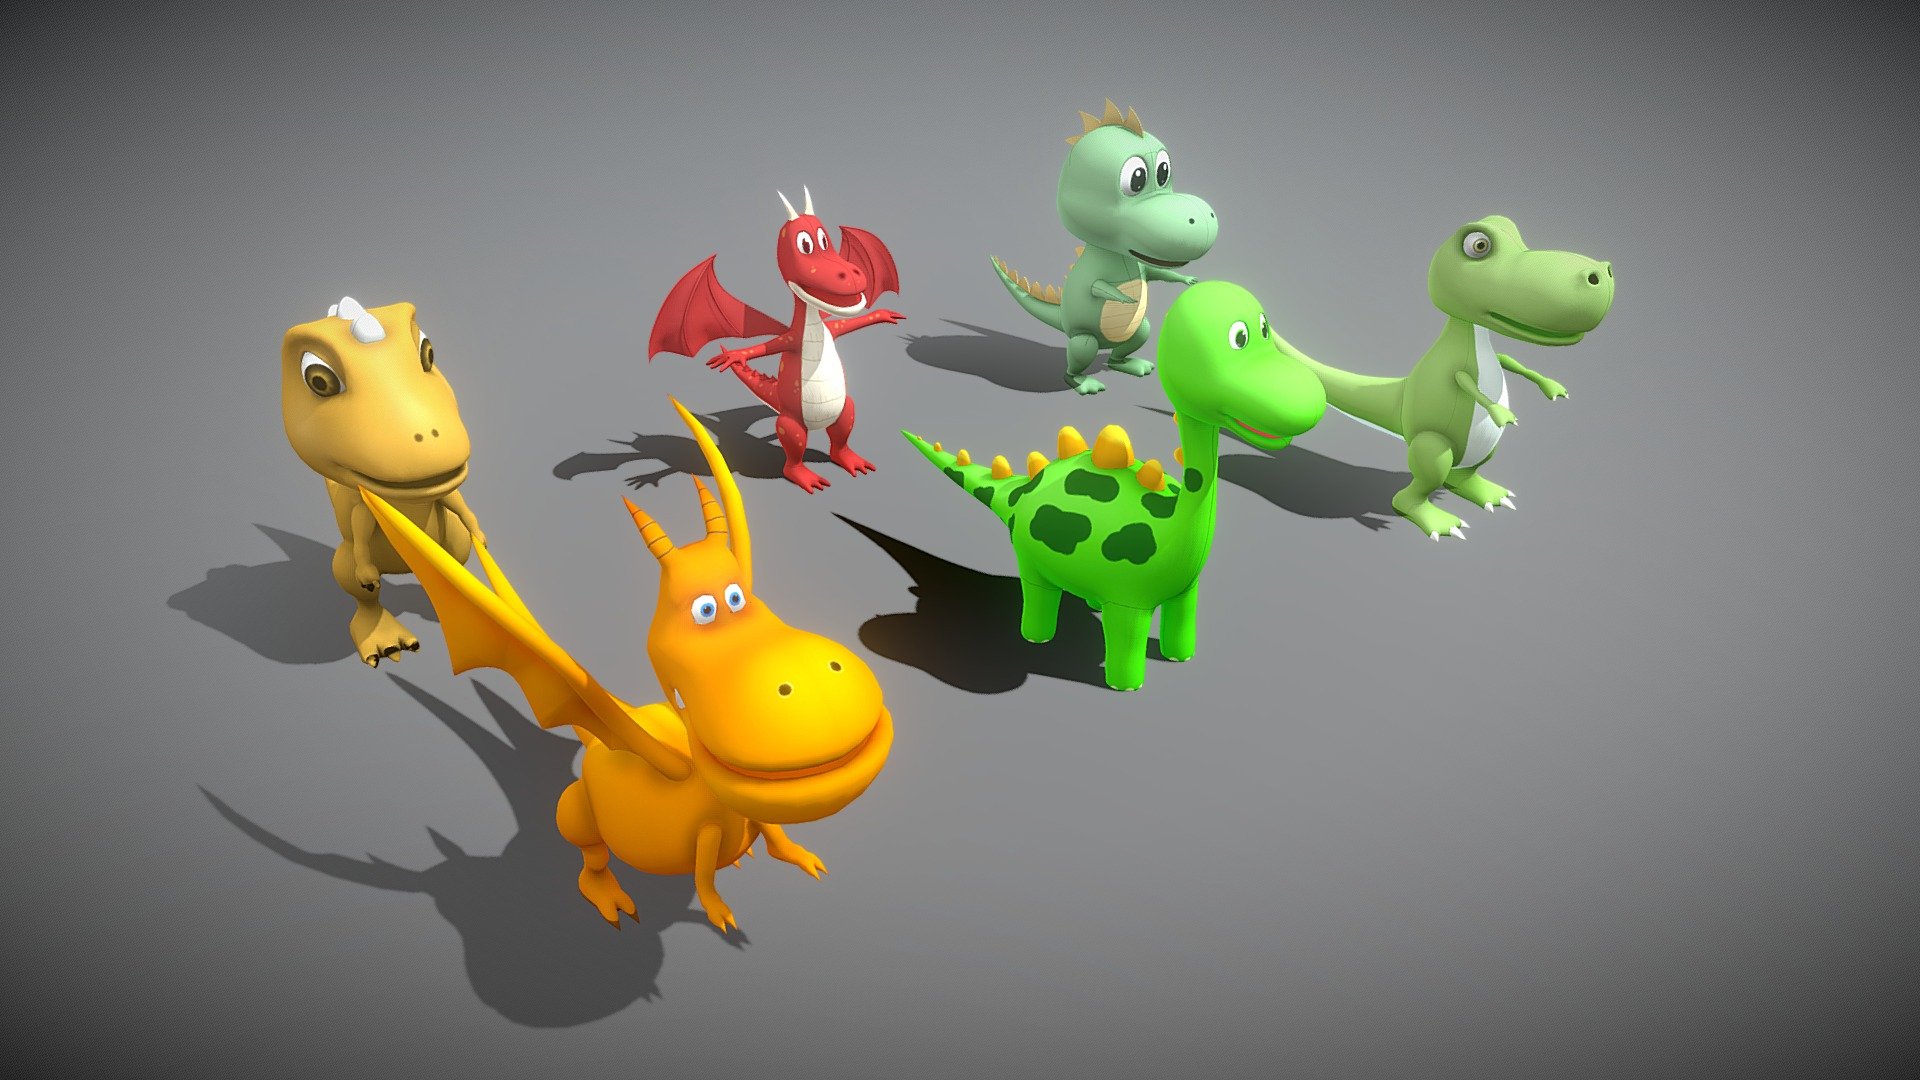 These are 6 cute dinosaurs model. 

If you want more cute models, or you have any quastions, please feel free to contact us.

E-mail:  sgzxzj13@163.com - Cartoon Dinosaurs - 3D model by Easy Game Studio (@Jeremy_Zh) 3d model